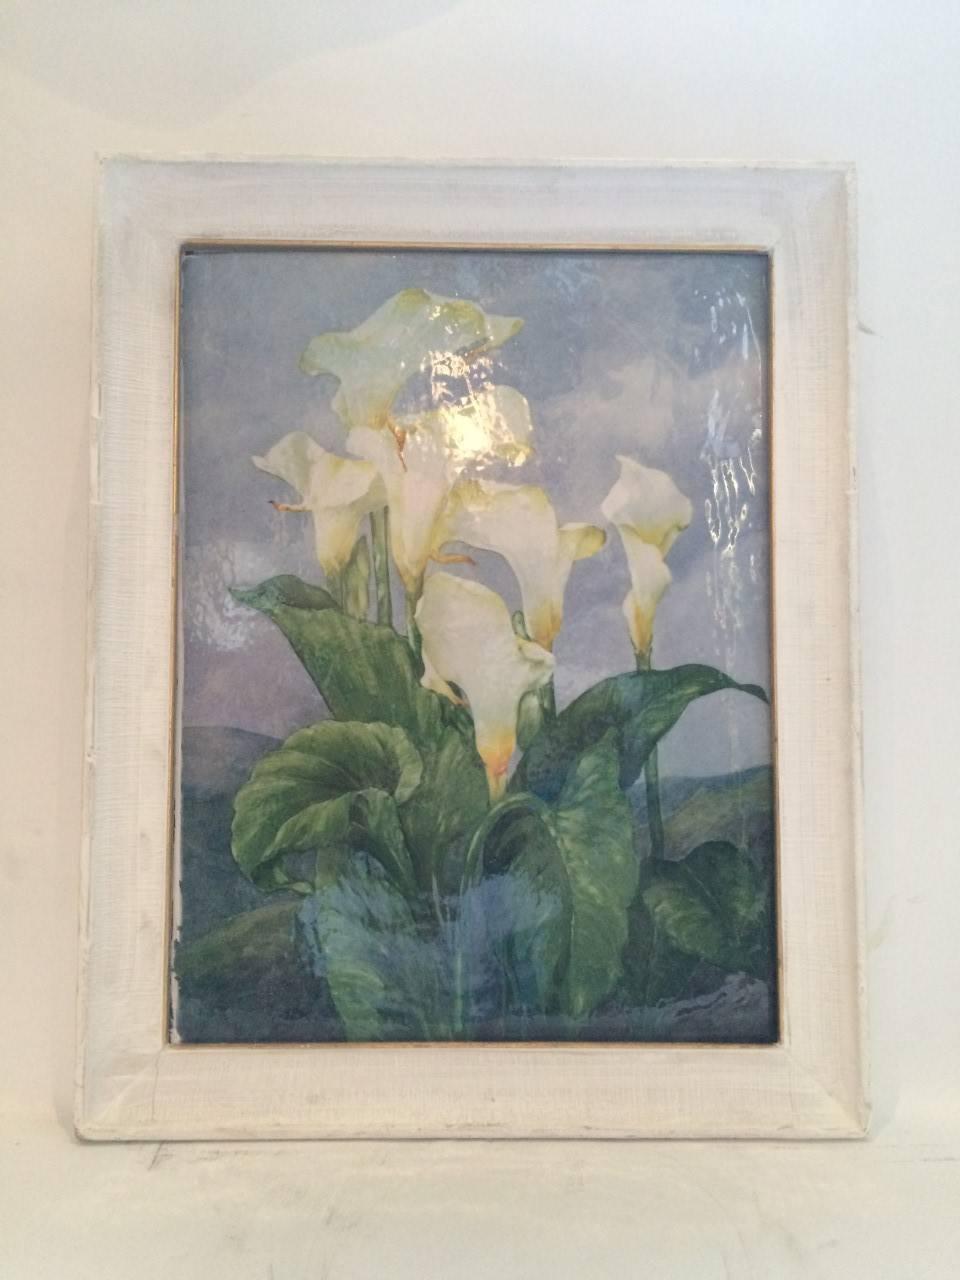 This painting was painted on ceramic and glazed after, in white ceramic frame,
circa 1940s, Italian, signed.